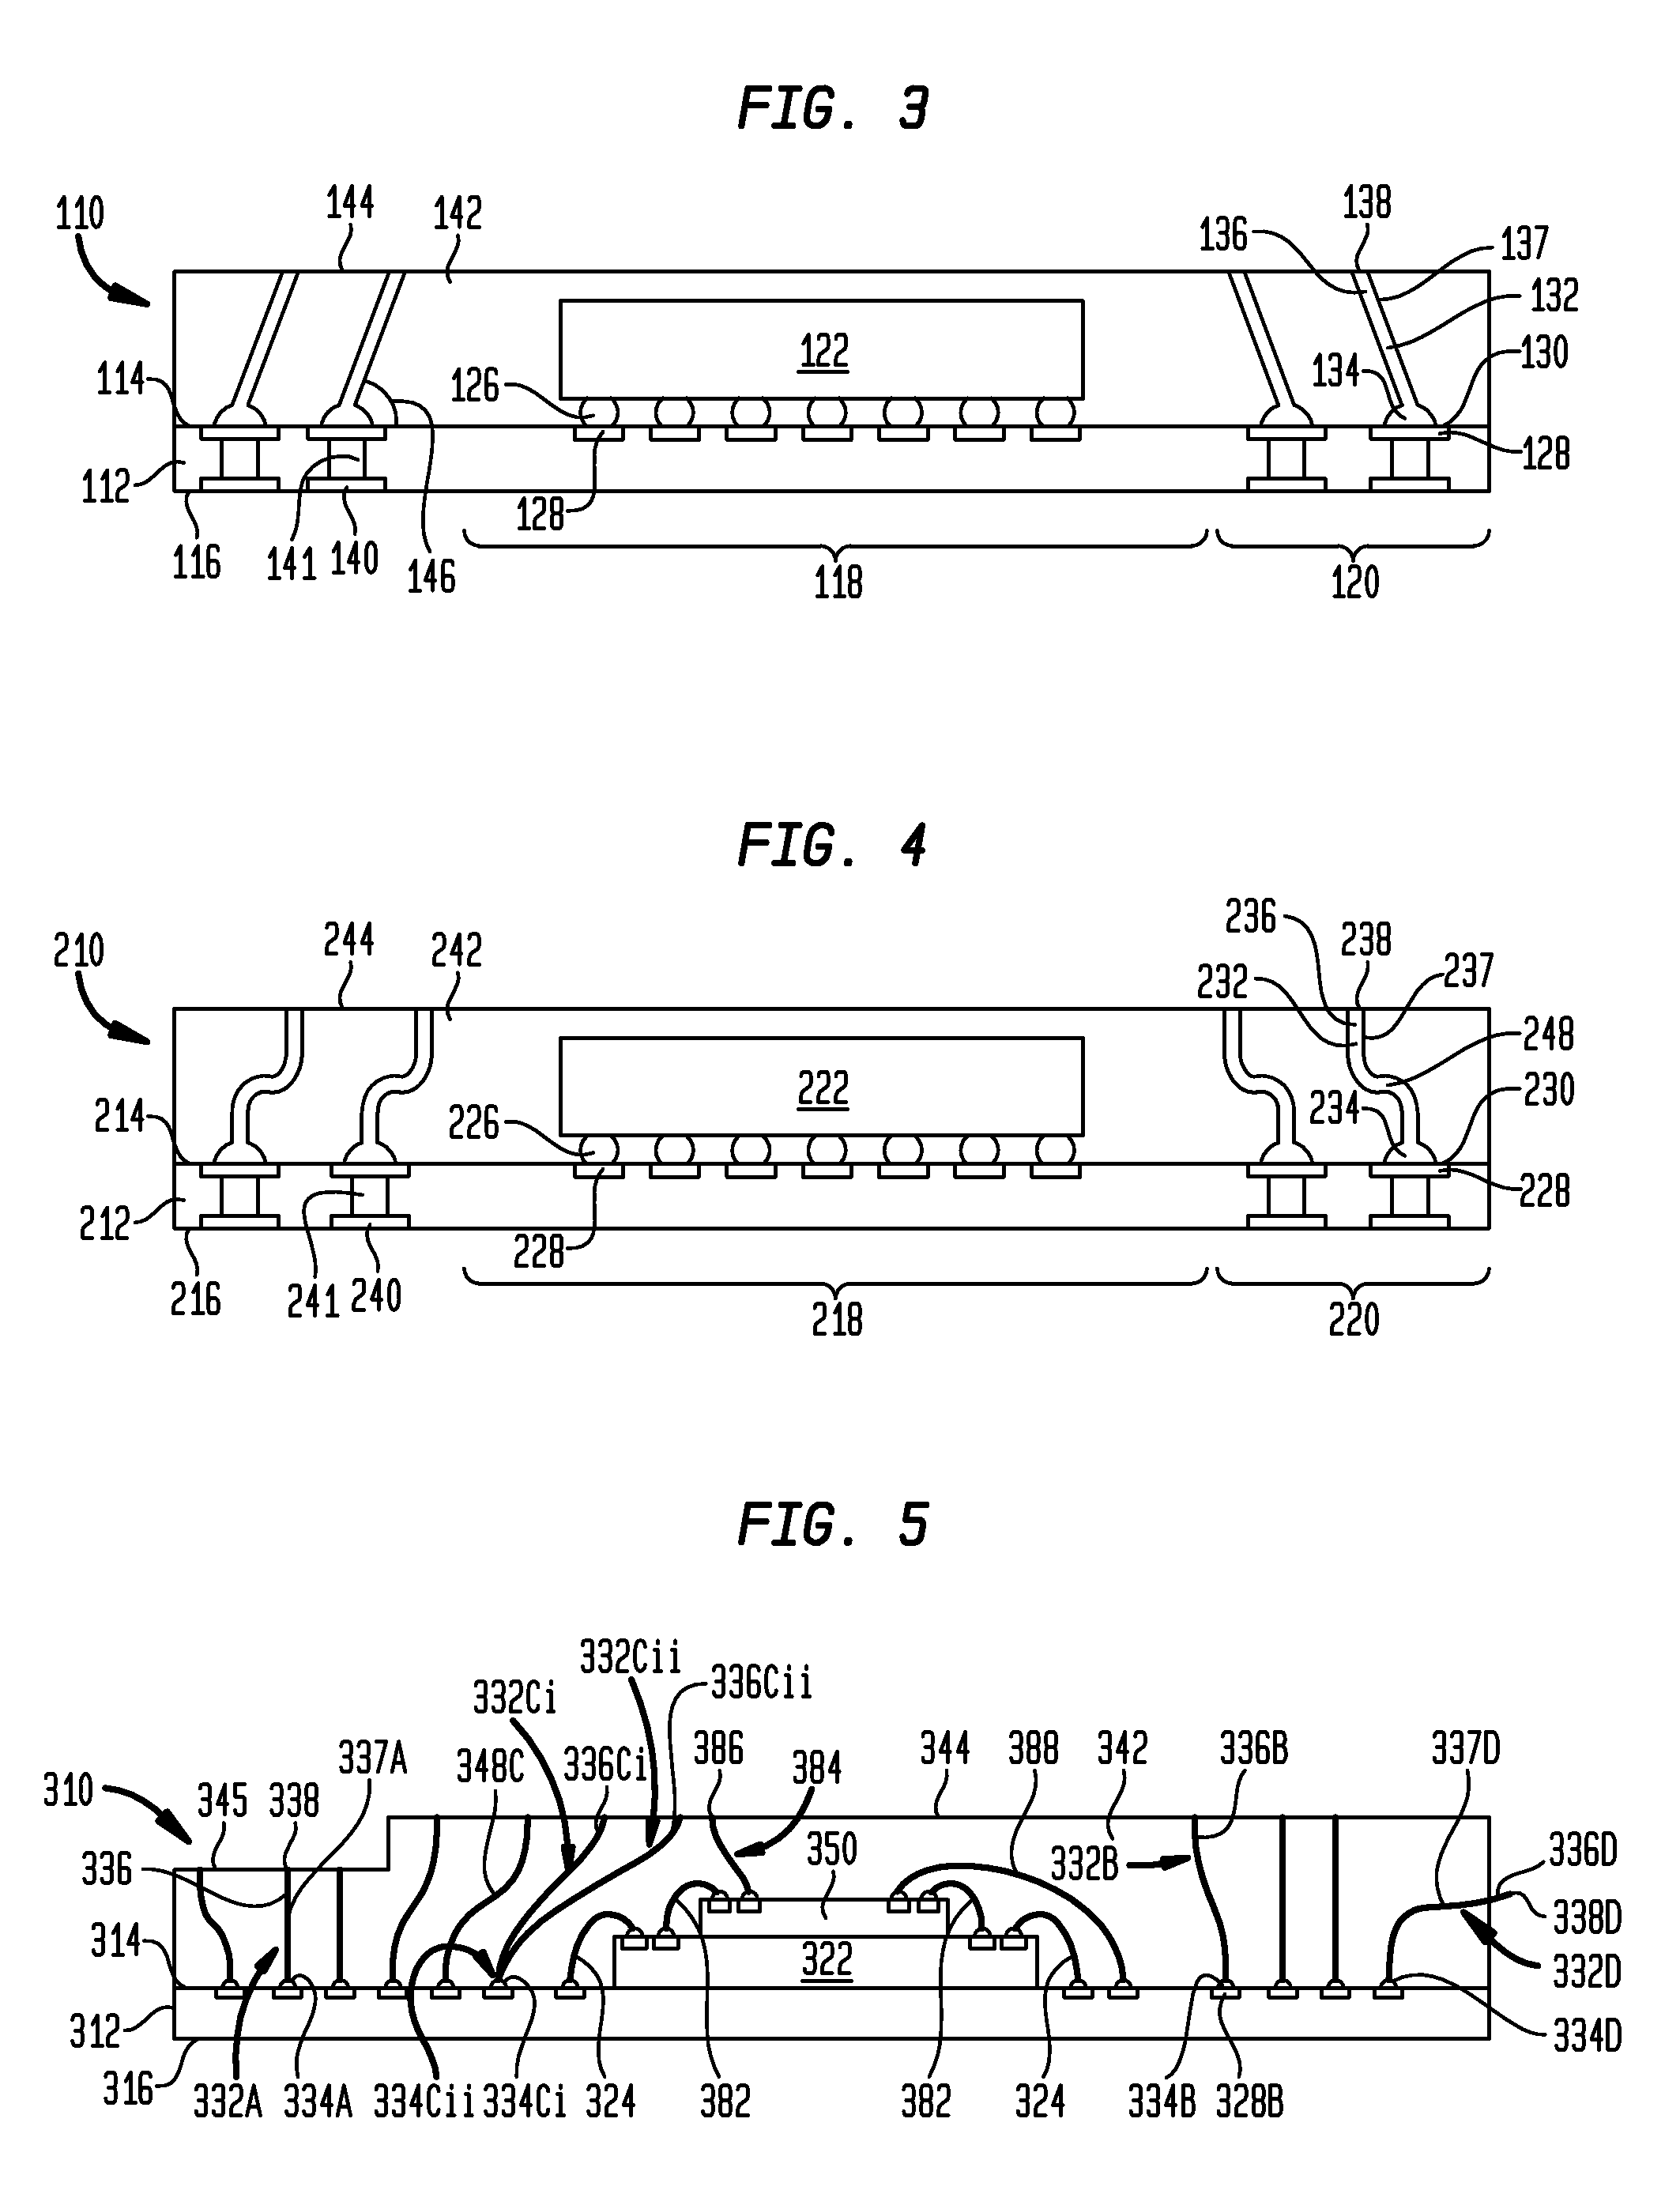 Package-on-package assembly with wire bonds to encapsulation surface